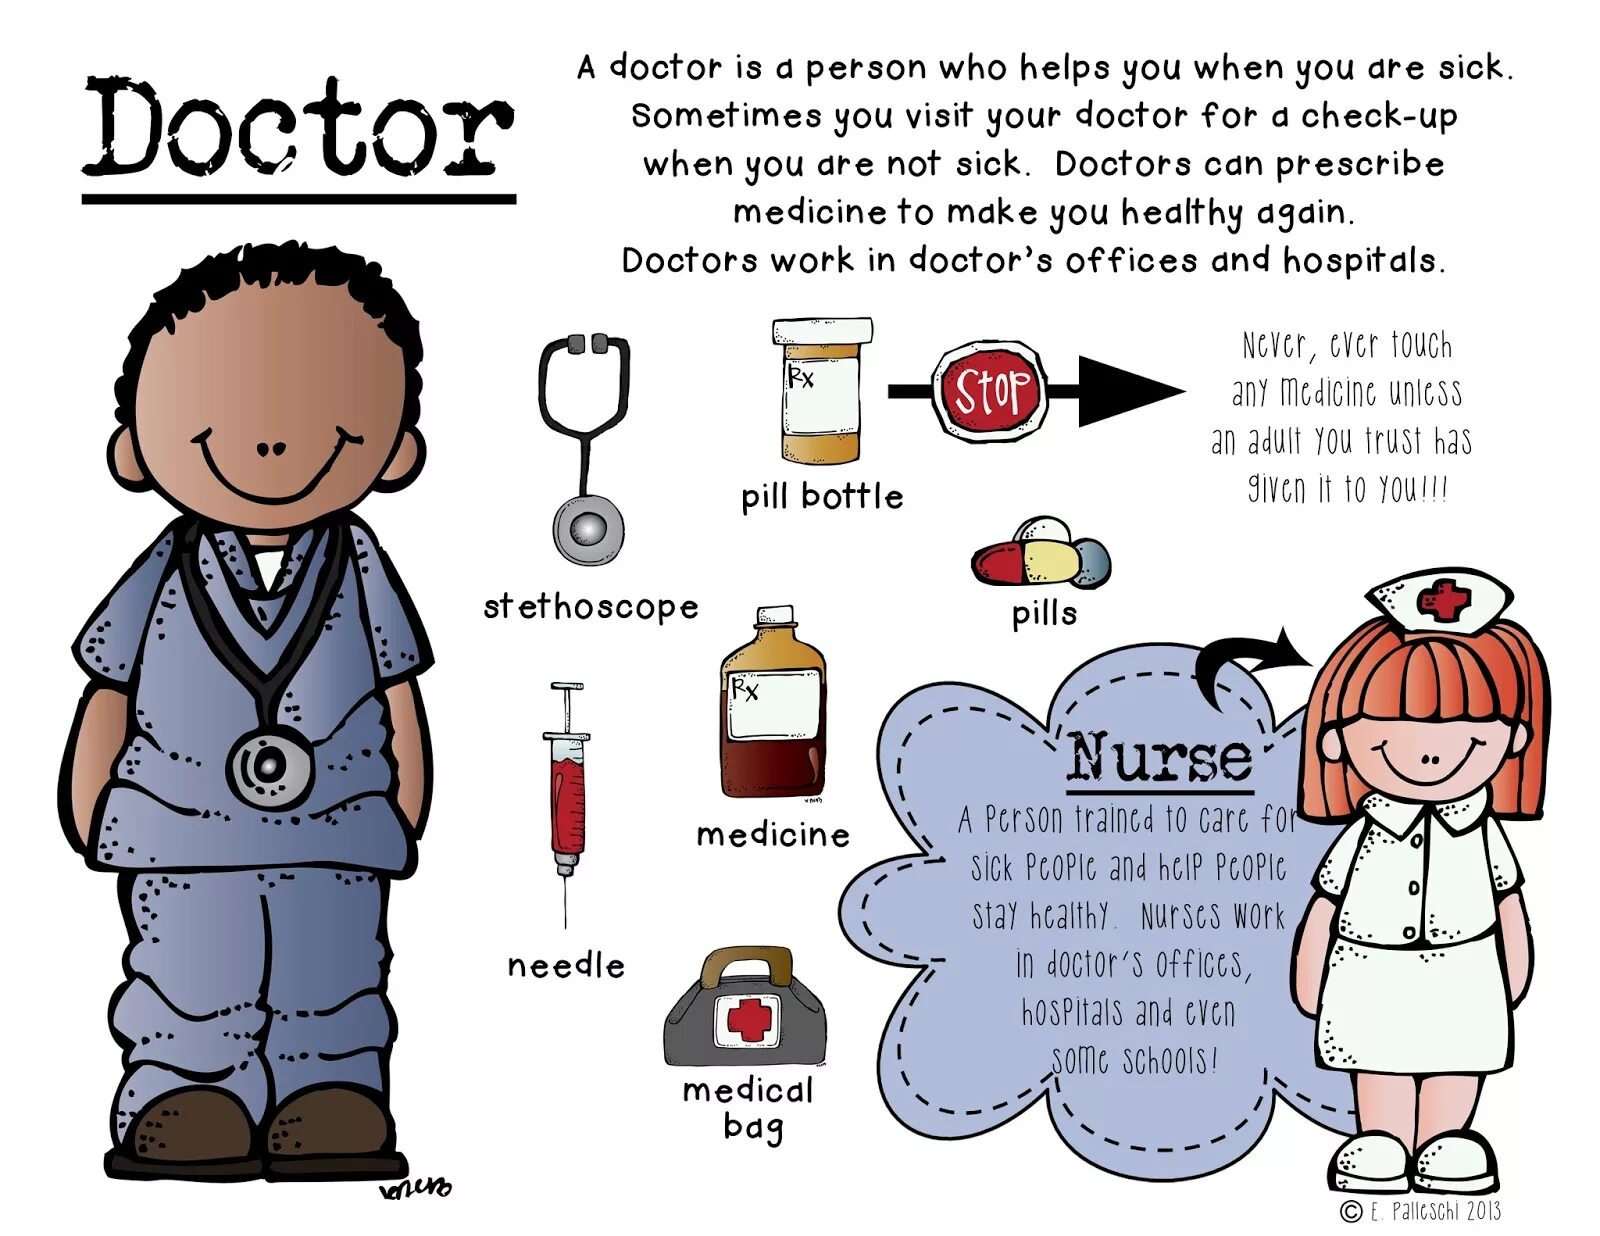 What do you i am doctor